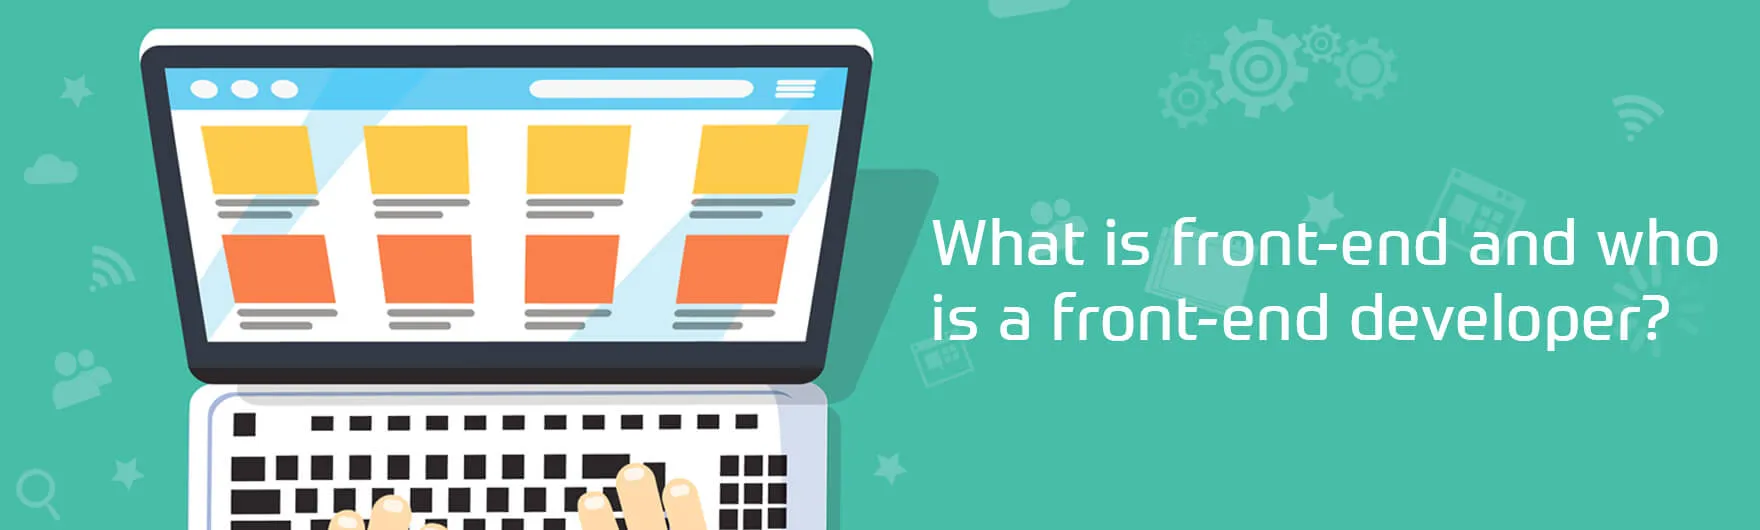 What is front-end and who is a front-end developer?